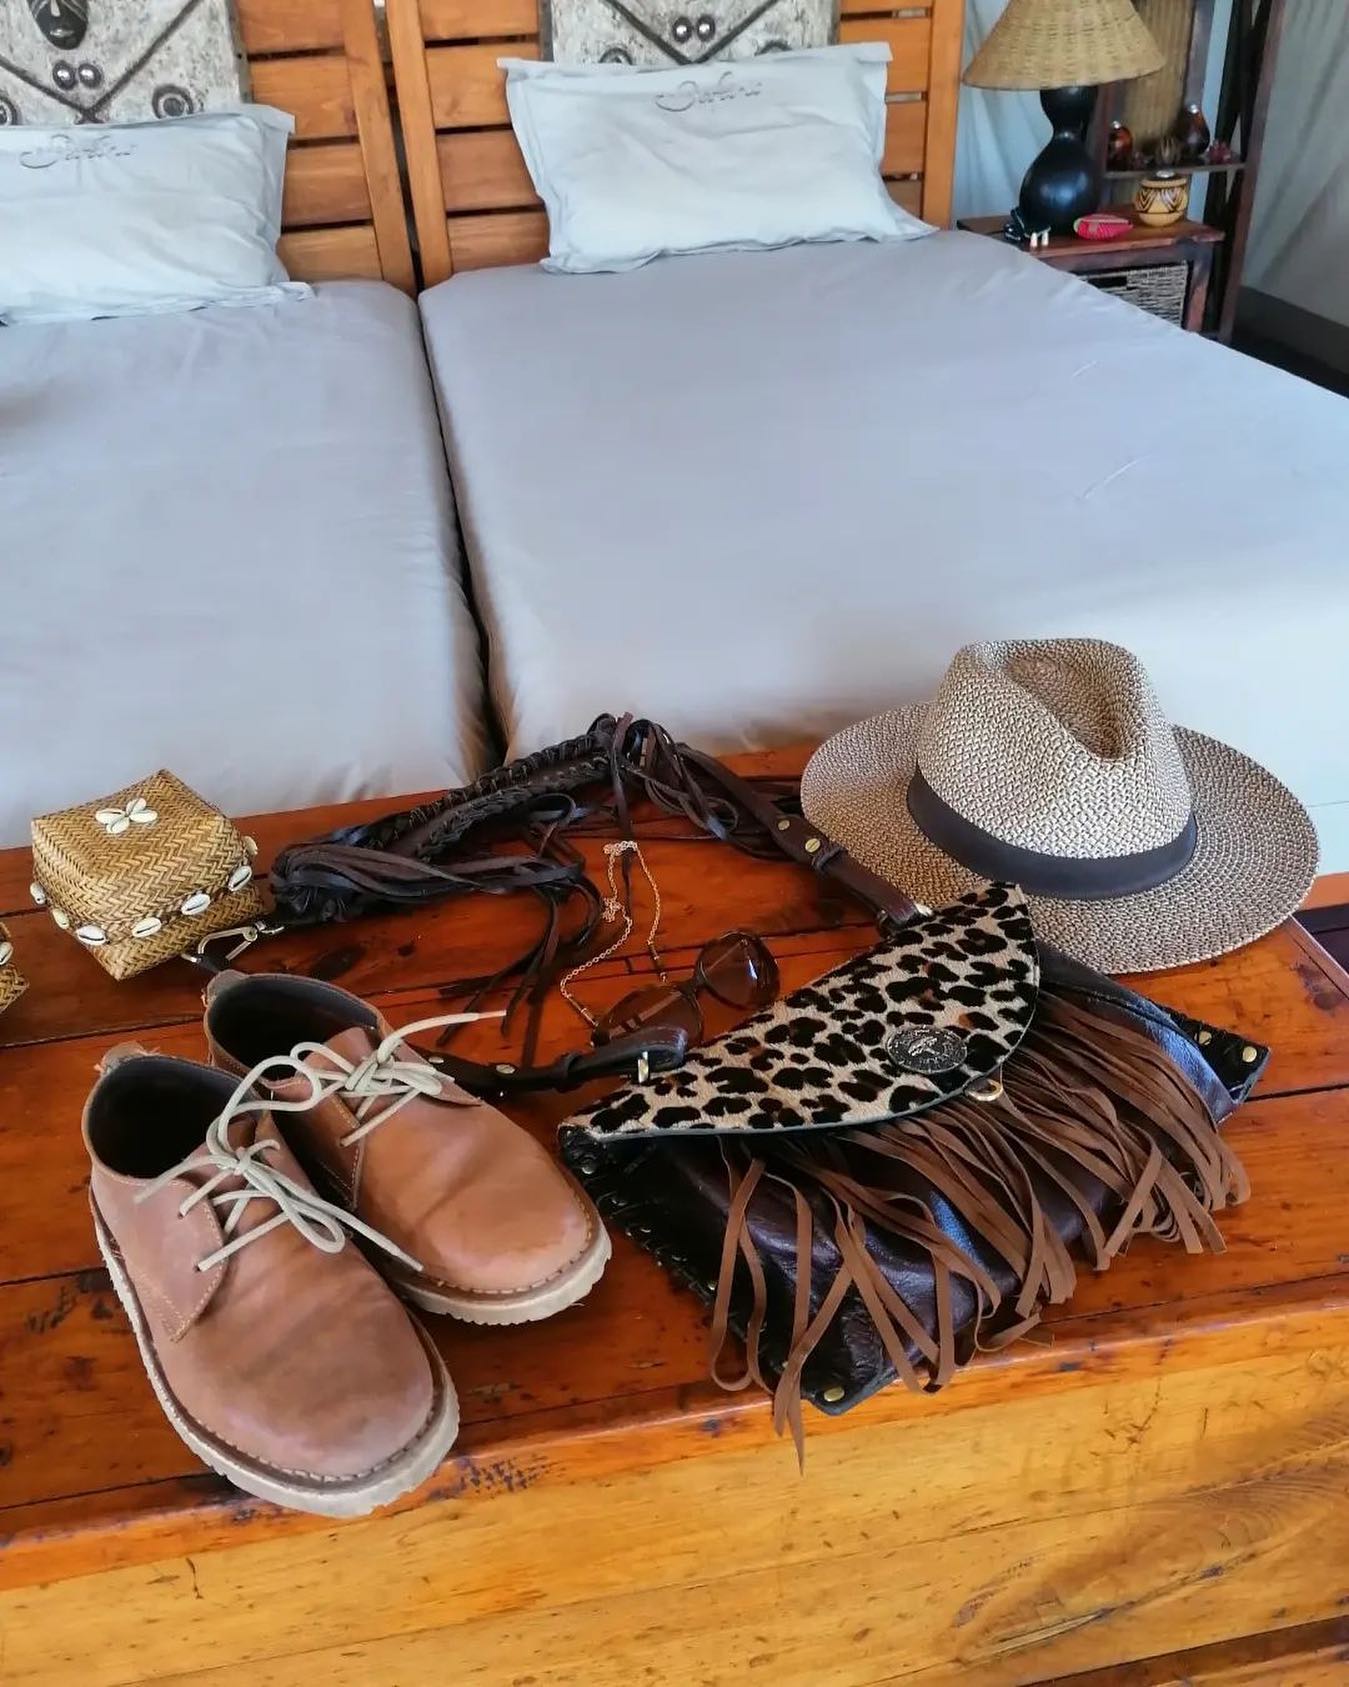 Safari in style ☀️

Have you been in on a safari before? Comment below! 👇 

📷: @africanmemoriesofjd
.
.
.
#southafrica #africa #southafricafashion #ootd #ootdinspiration #safari #safariafrica #womensshoes #sustainablefashion